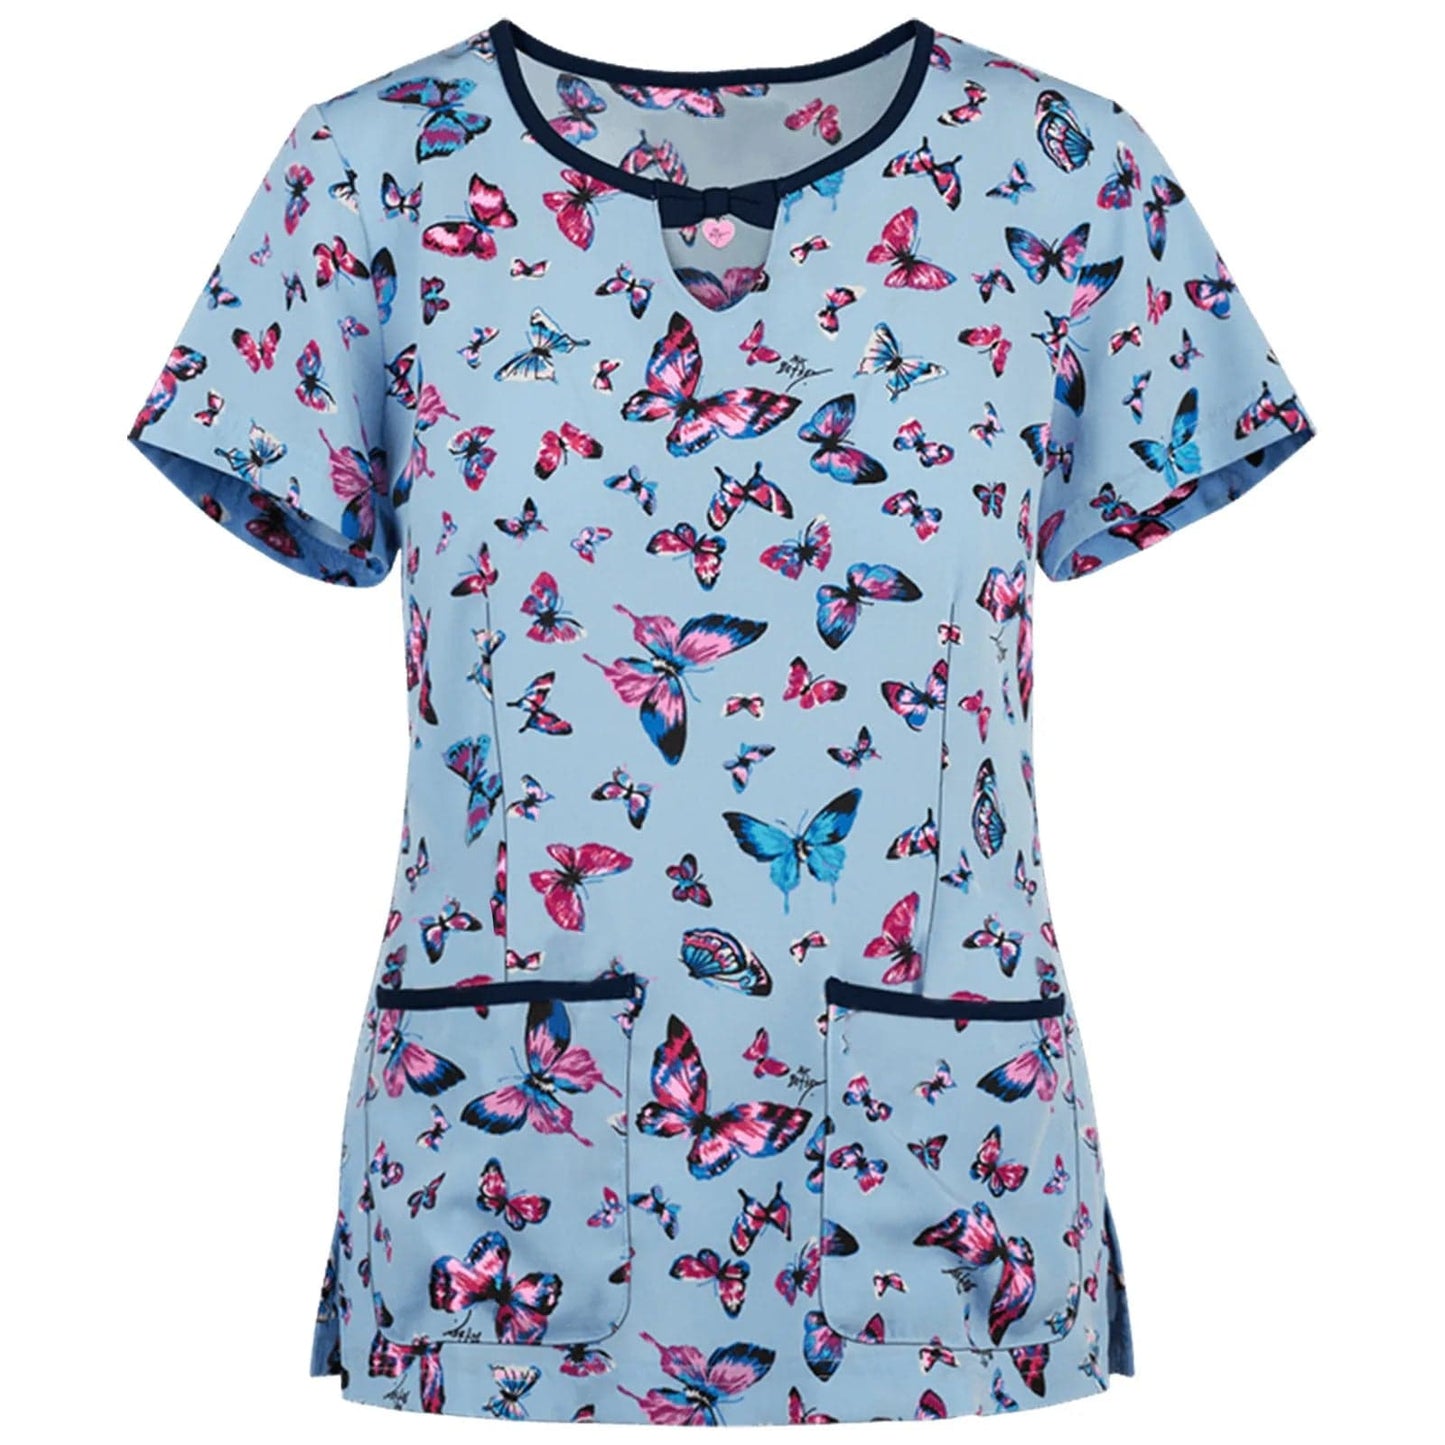 Women's Whimsical Print Stretch Medical Scrub Top  Pioneer Kitty Market S Butterflies 